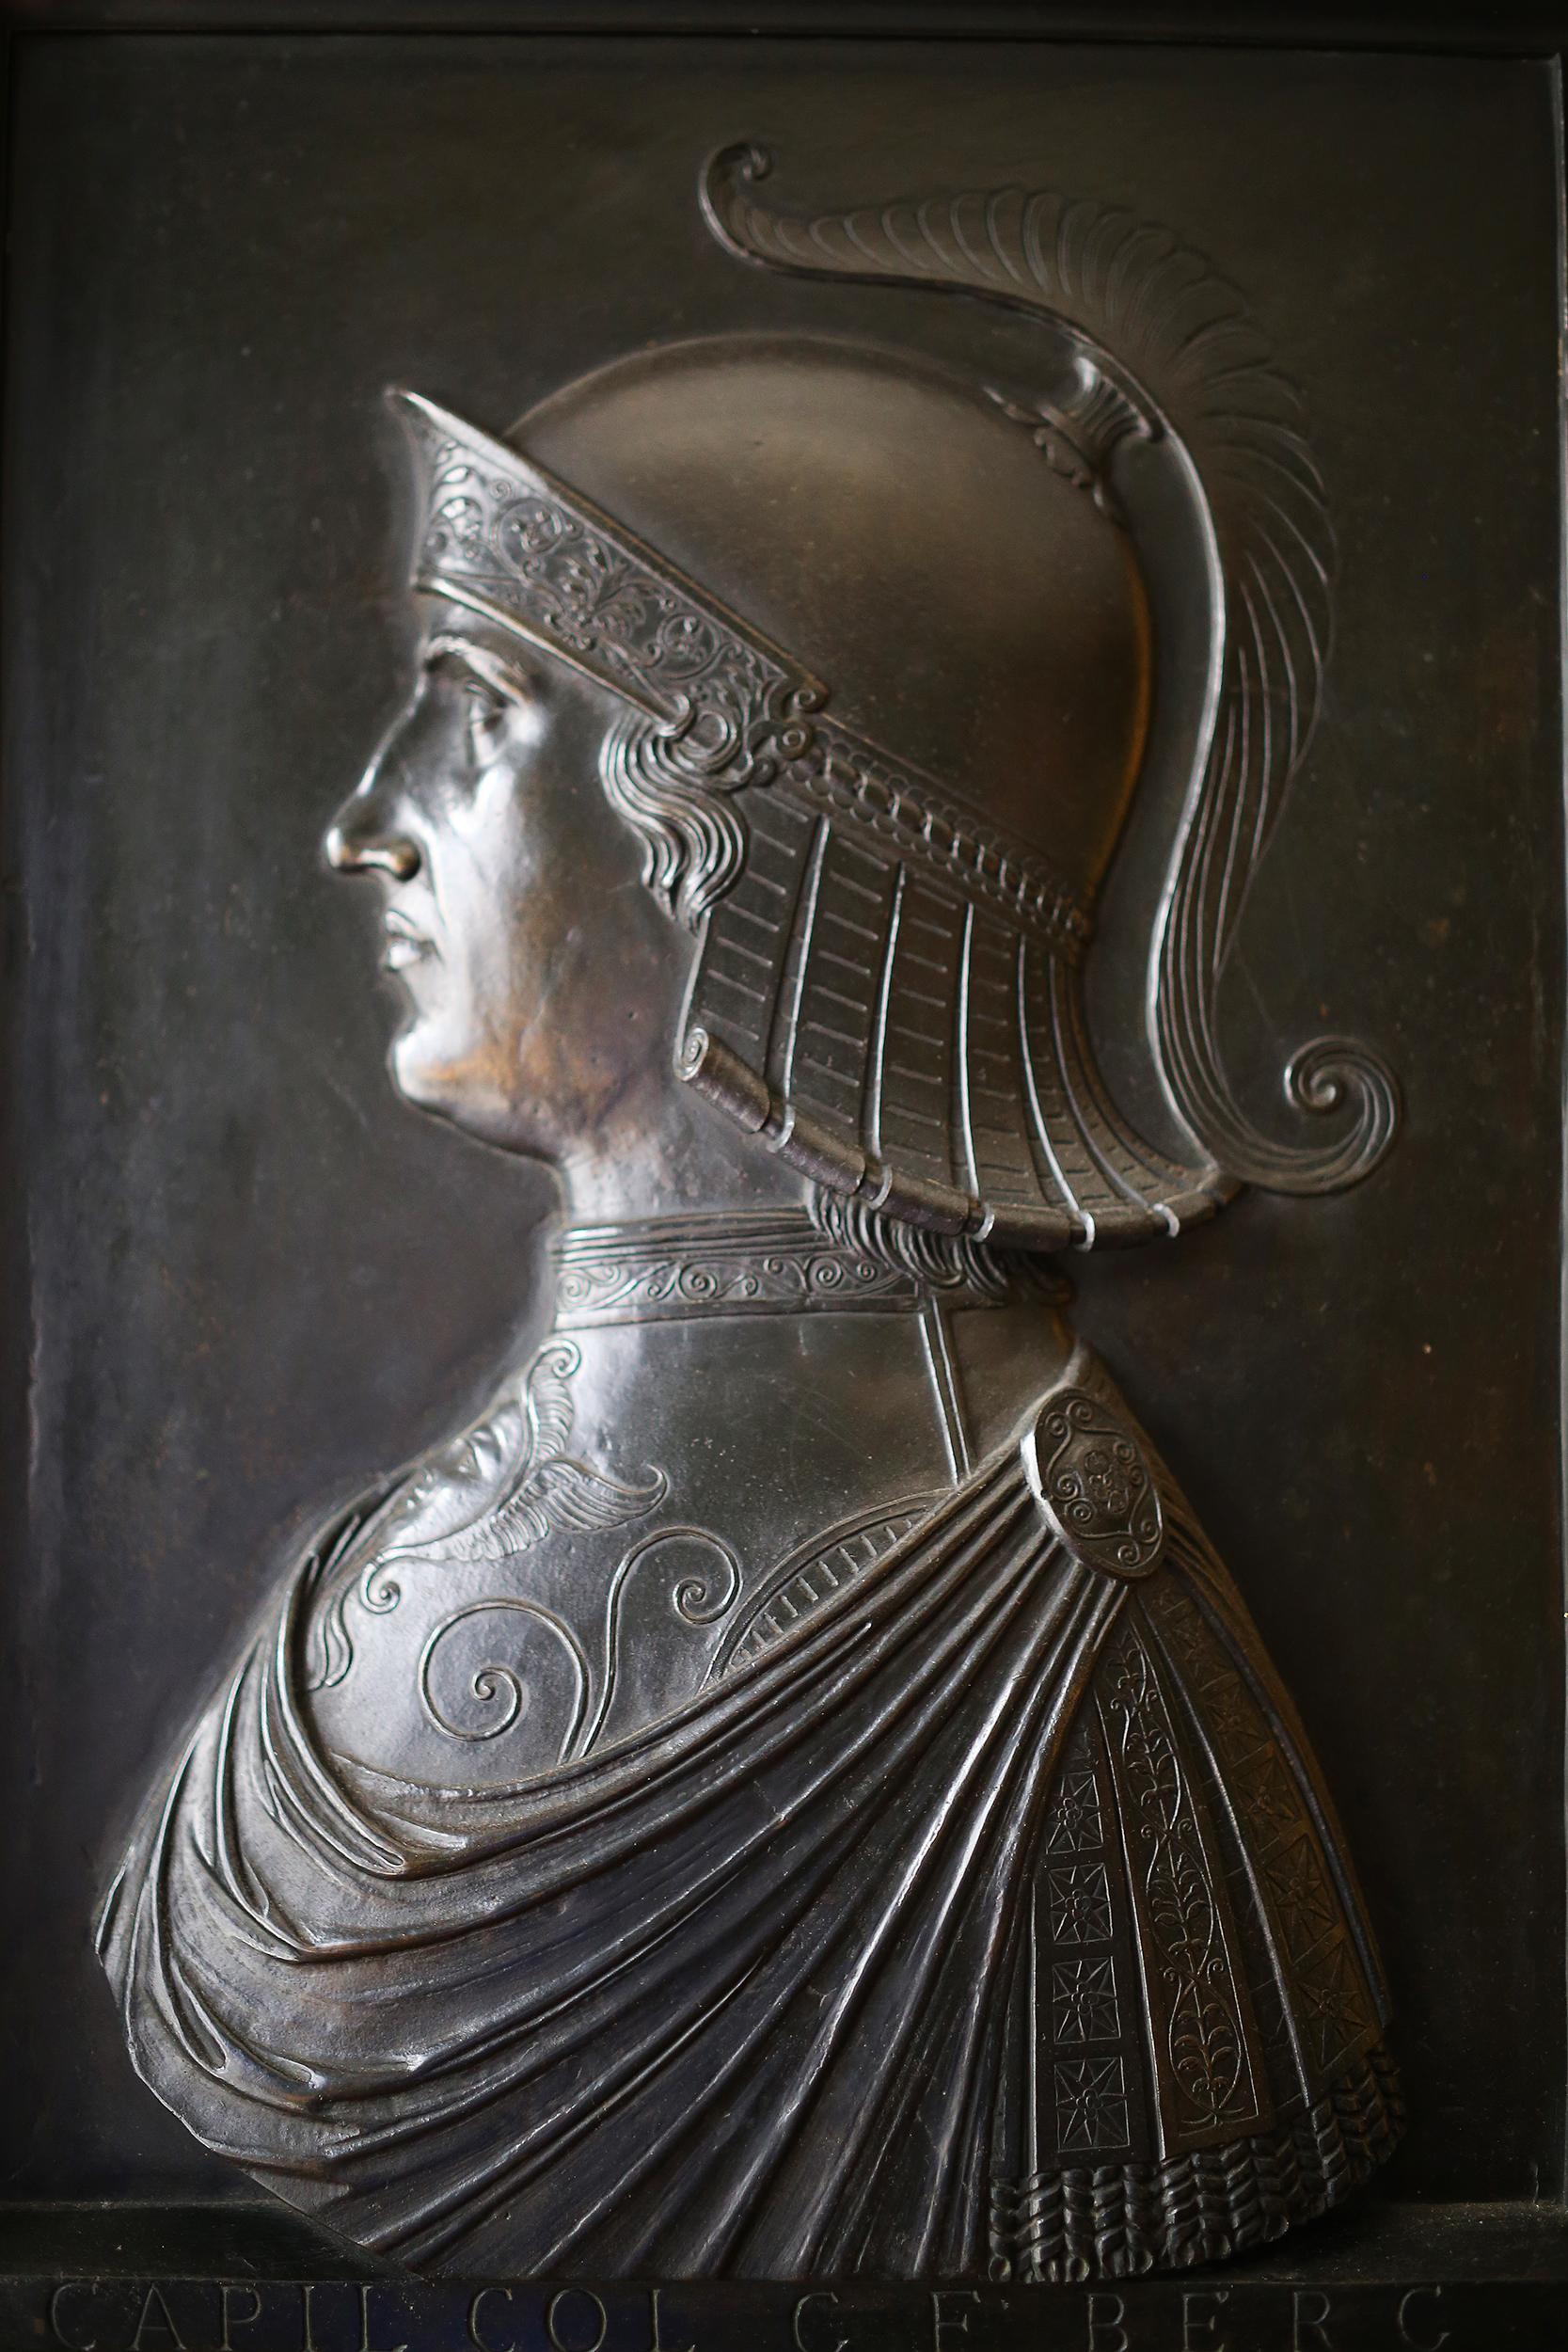 A spectacular bronze relief of sublime detail depicting the General Capiliata Colleoni in profile. The general is shown wearing a plumed helmet and cuirass with sculpted breastplate aegis. The inscription notes the friendship of the warrior with the